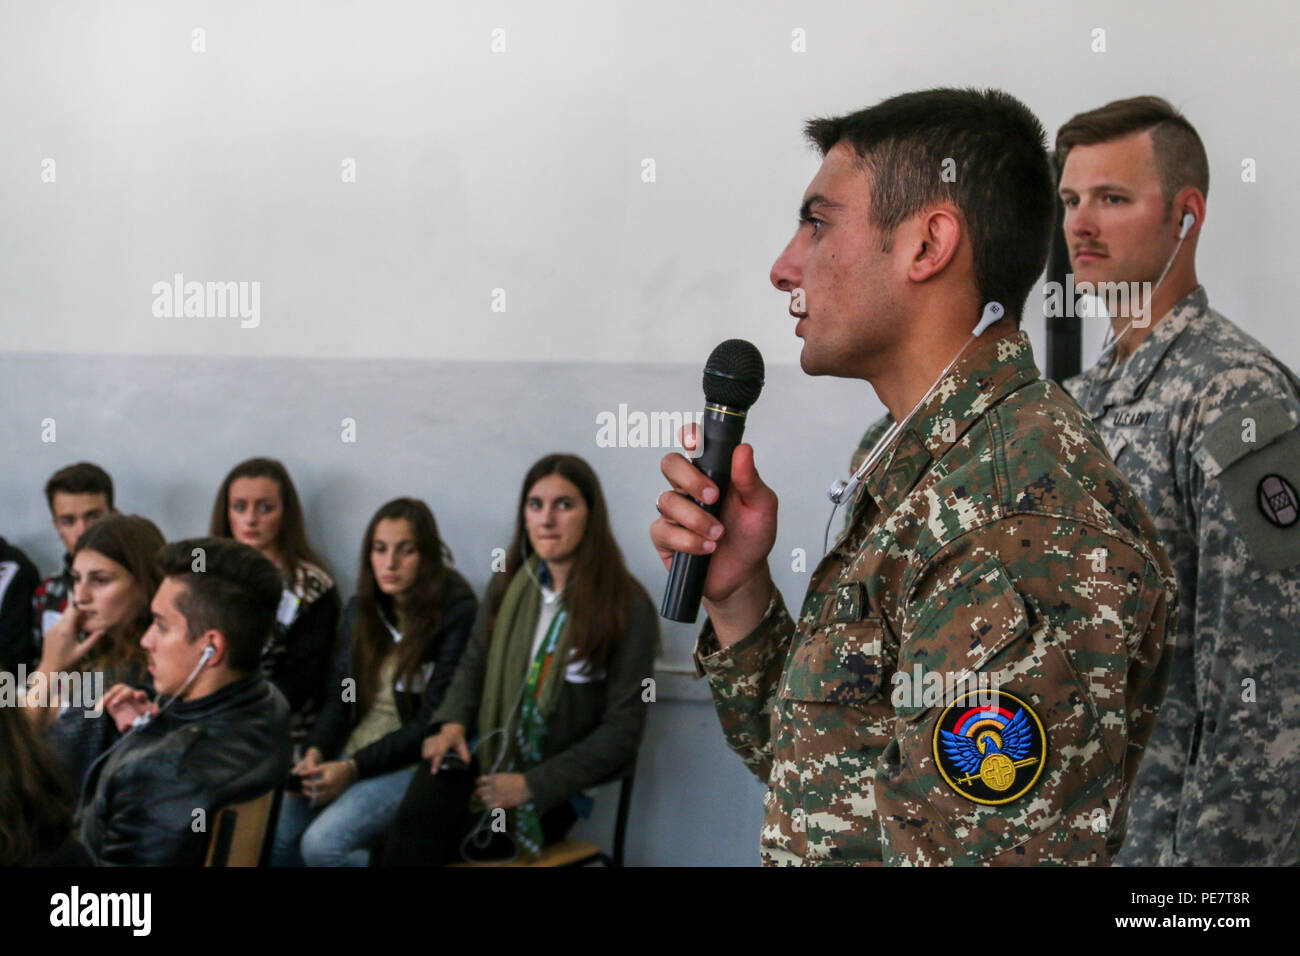 An Armenian Soldier serving in Kosovo with Multinational Battle Group-East speaks to a class of students about what makes a good leader, while volunteering at a Violence Free Future youth tolerance event Oct. 17, 2015, in Kacanik, Kosovo. Several Members of MNBG-E volunteered their free time to help with the event, where more than 100 students learned about overcoming stereotypes and solving differences without violence. (U.S. Army photo by Staff Sgt. Mary Junell, Multinational Battle Group-East) Stock Photo